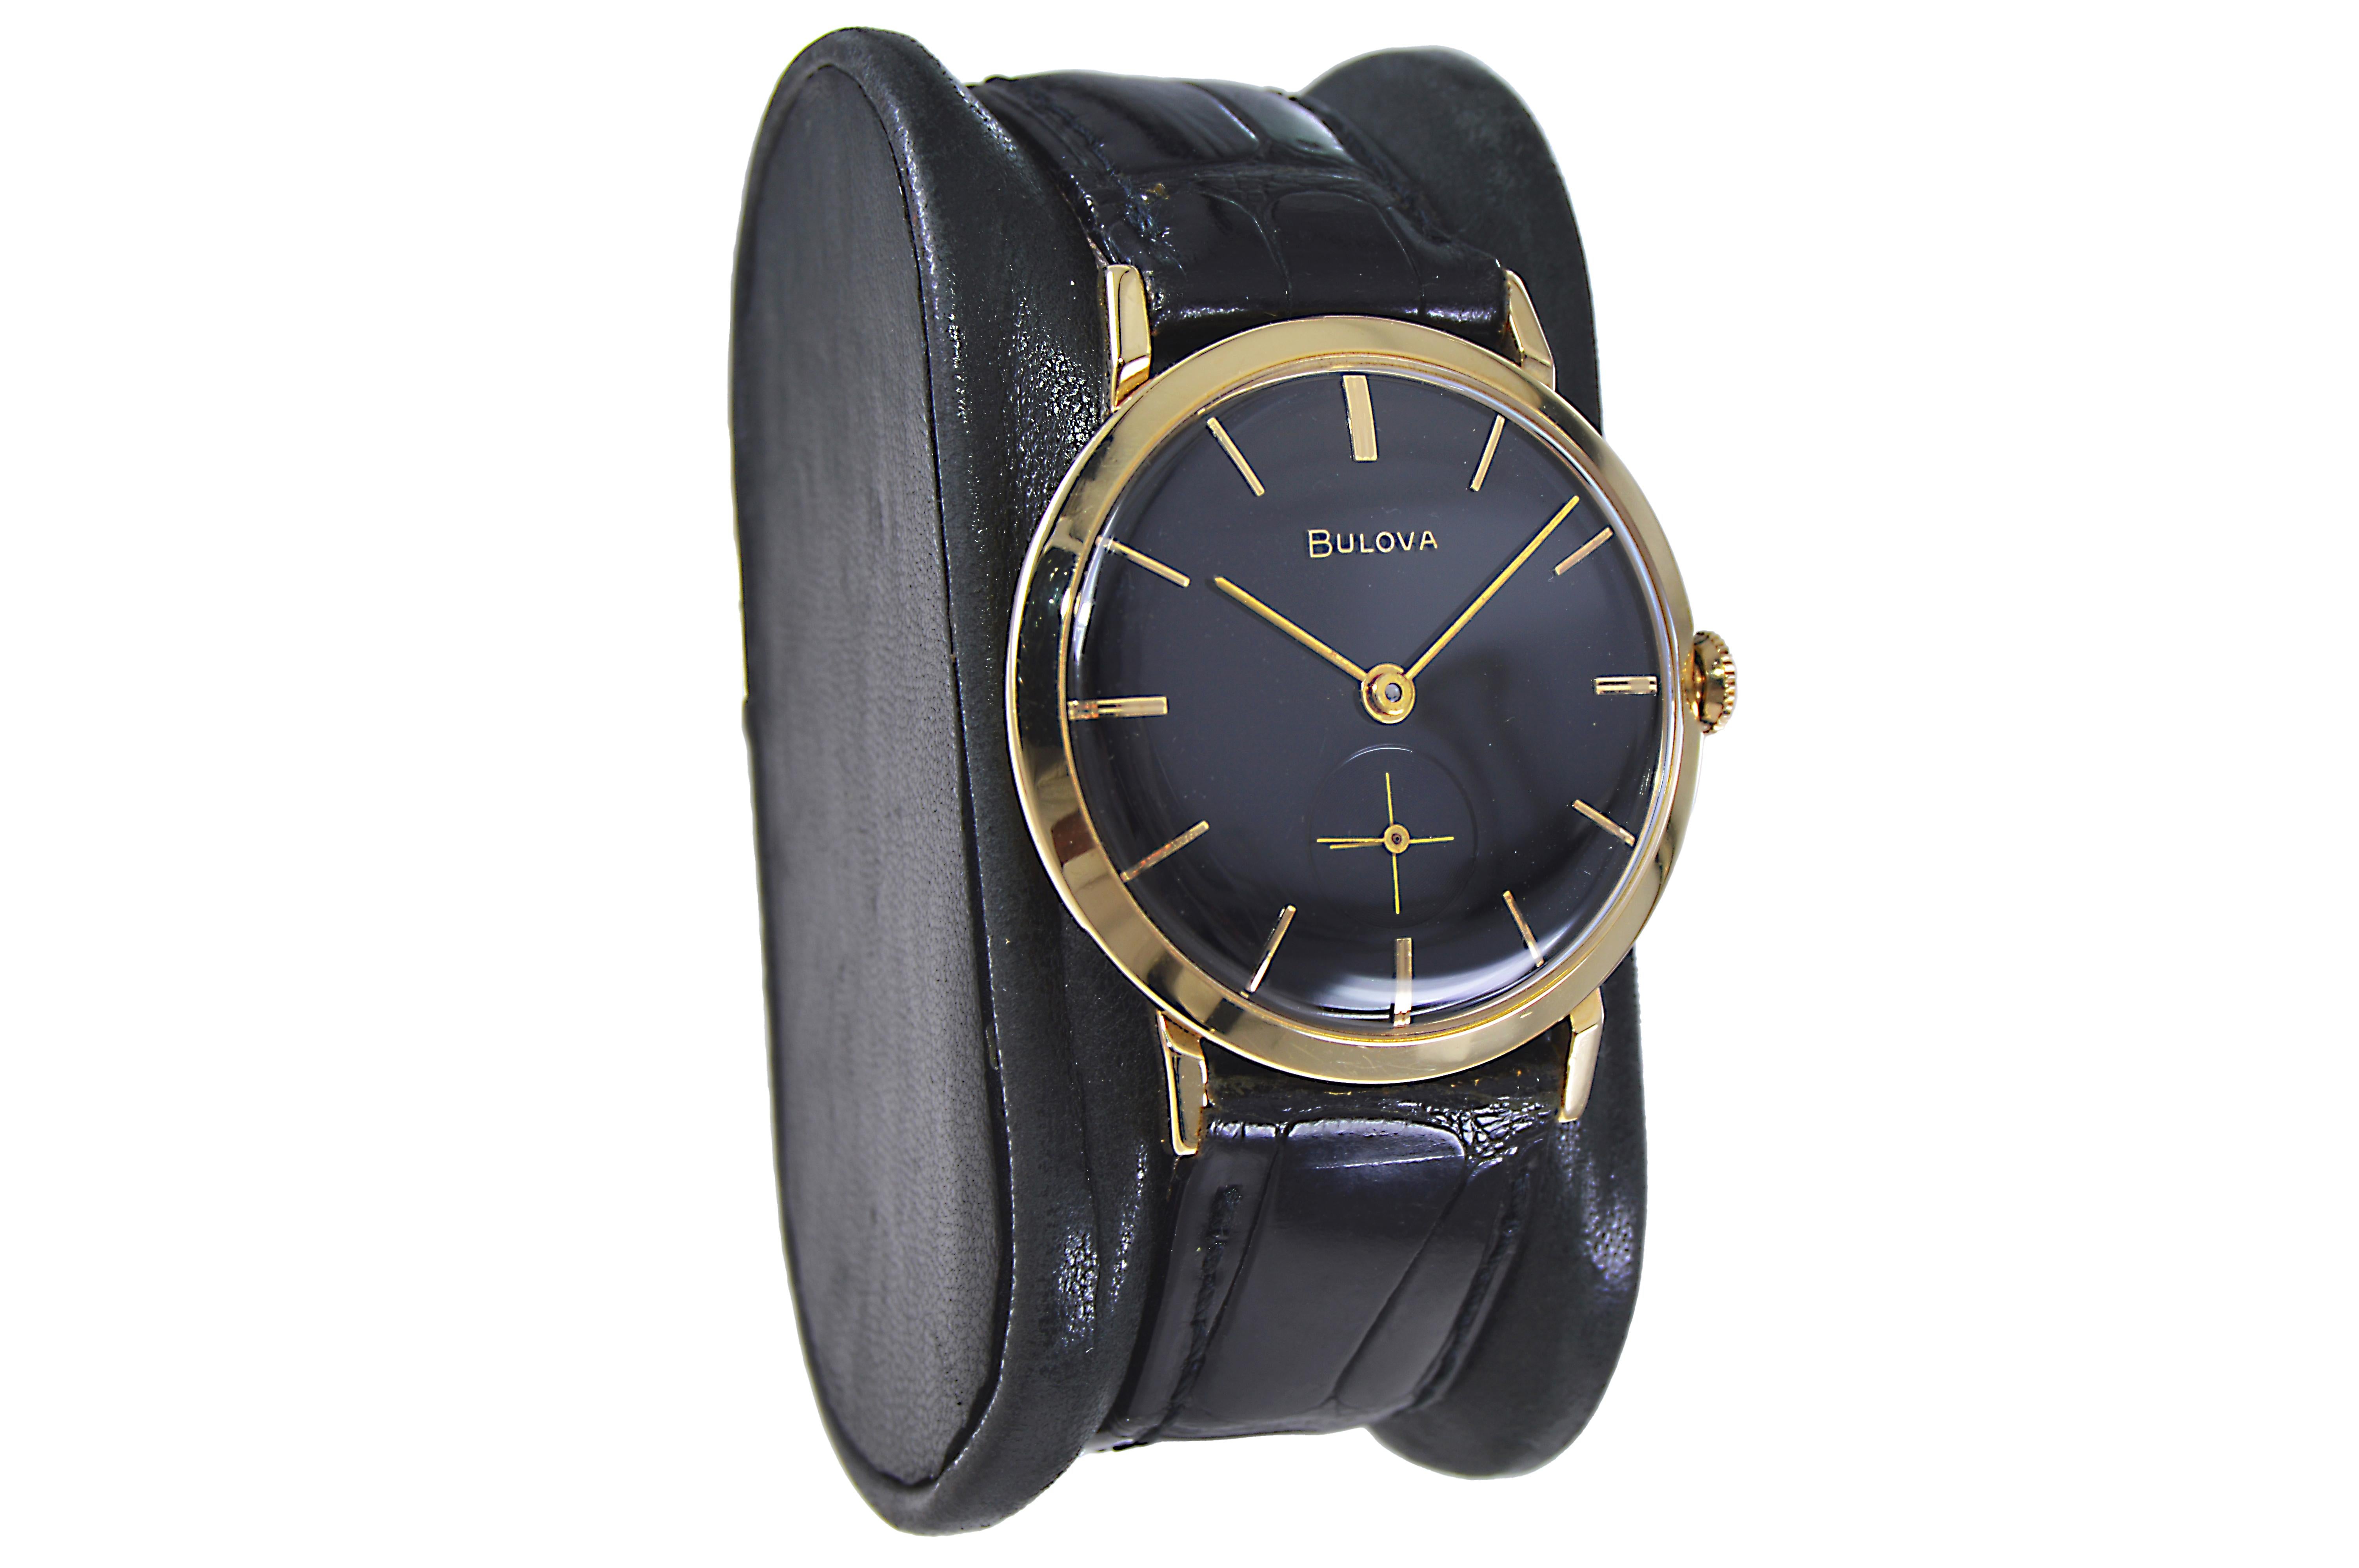 FACTORY / HOUSE: Bulova Watch Company
STYLE / REFERENCE: Round Dress Style 
METAL / MATERIAL: 14Kt. Solid Gold 
CIRCA / YEAR: 1960's
DIMENSIONS / SIZE: 38mm x 33mm
MOVEMENT / CALIBER: Manual Winding / 21 Jewels 
DIAL / HANDS: Black with Baton